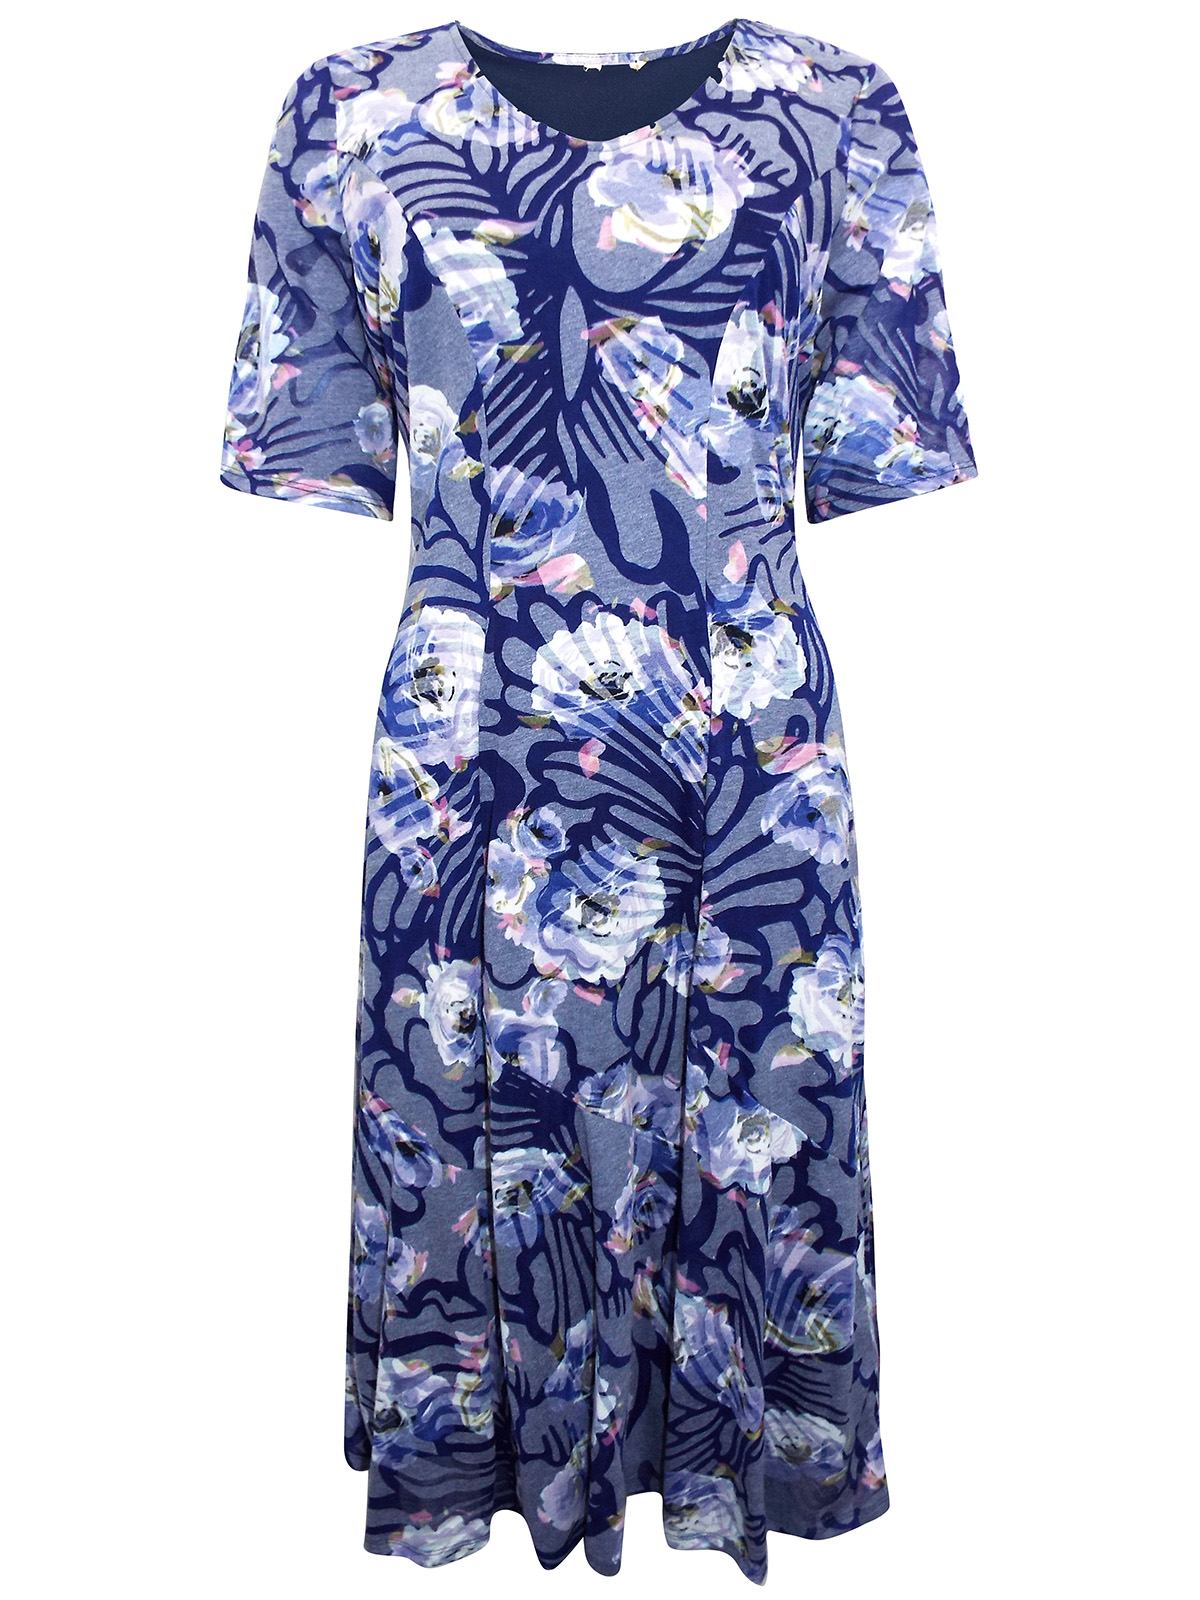 Cotton Traders NAVY Floral Burnout Midi Dress - Size 10 to 20